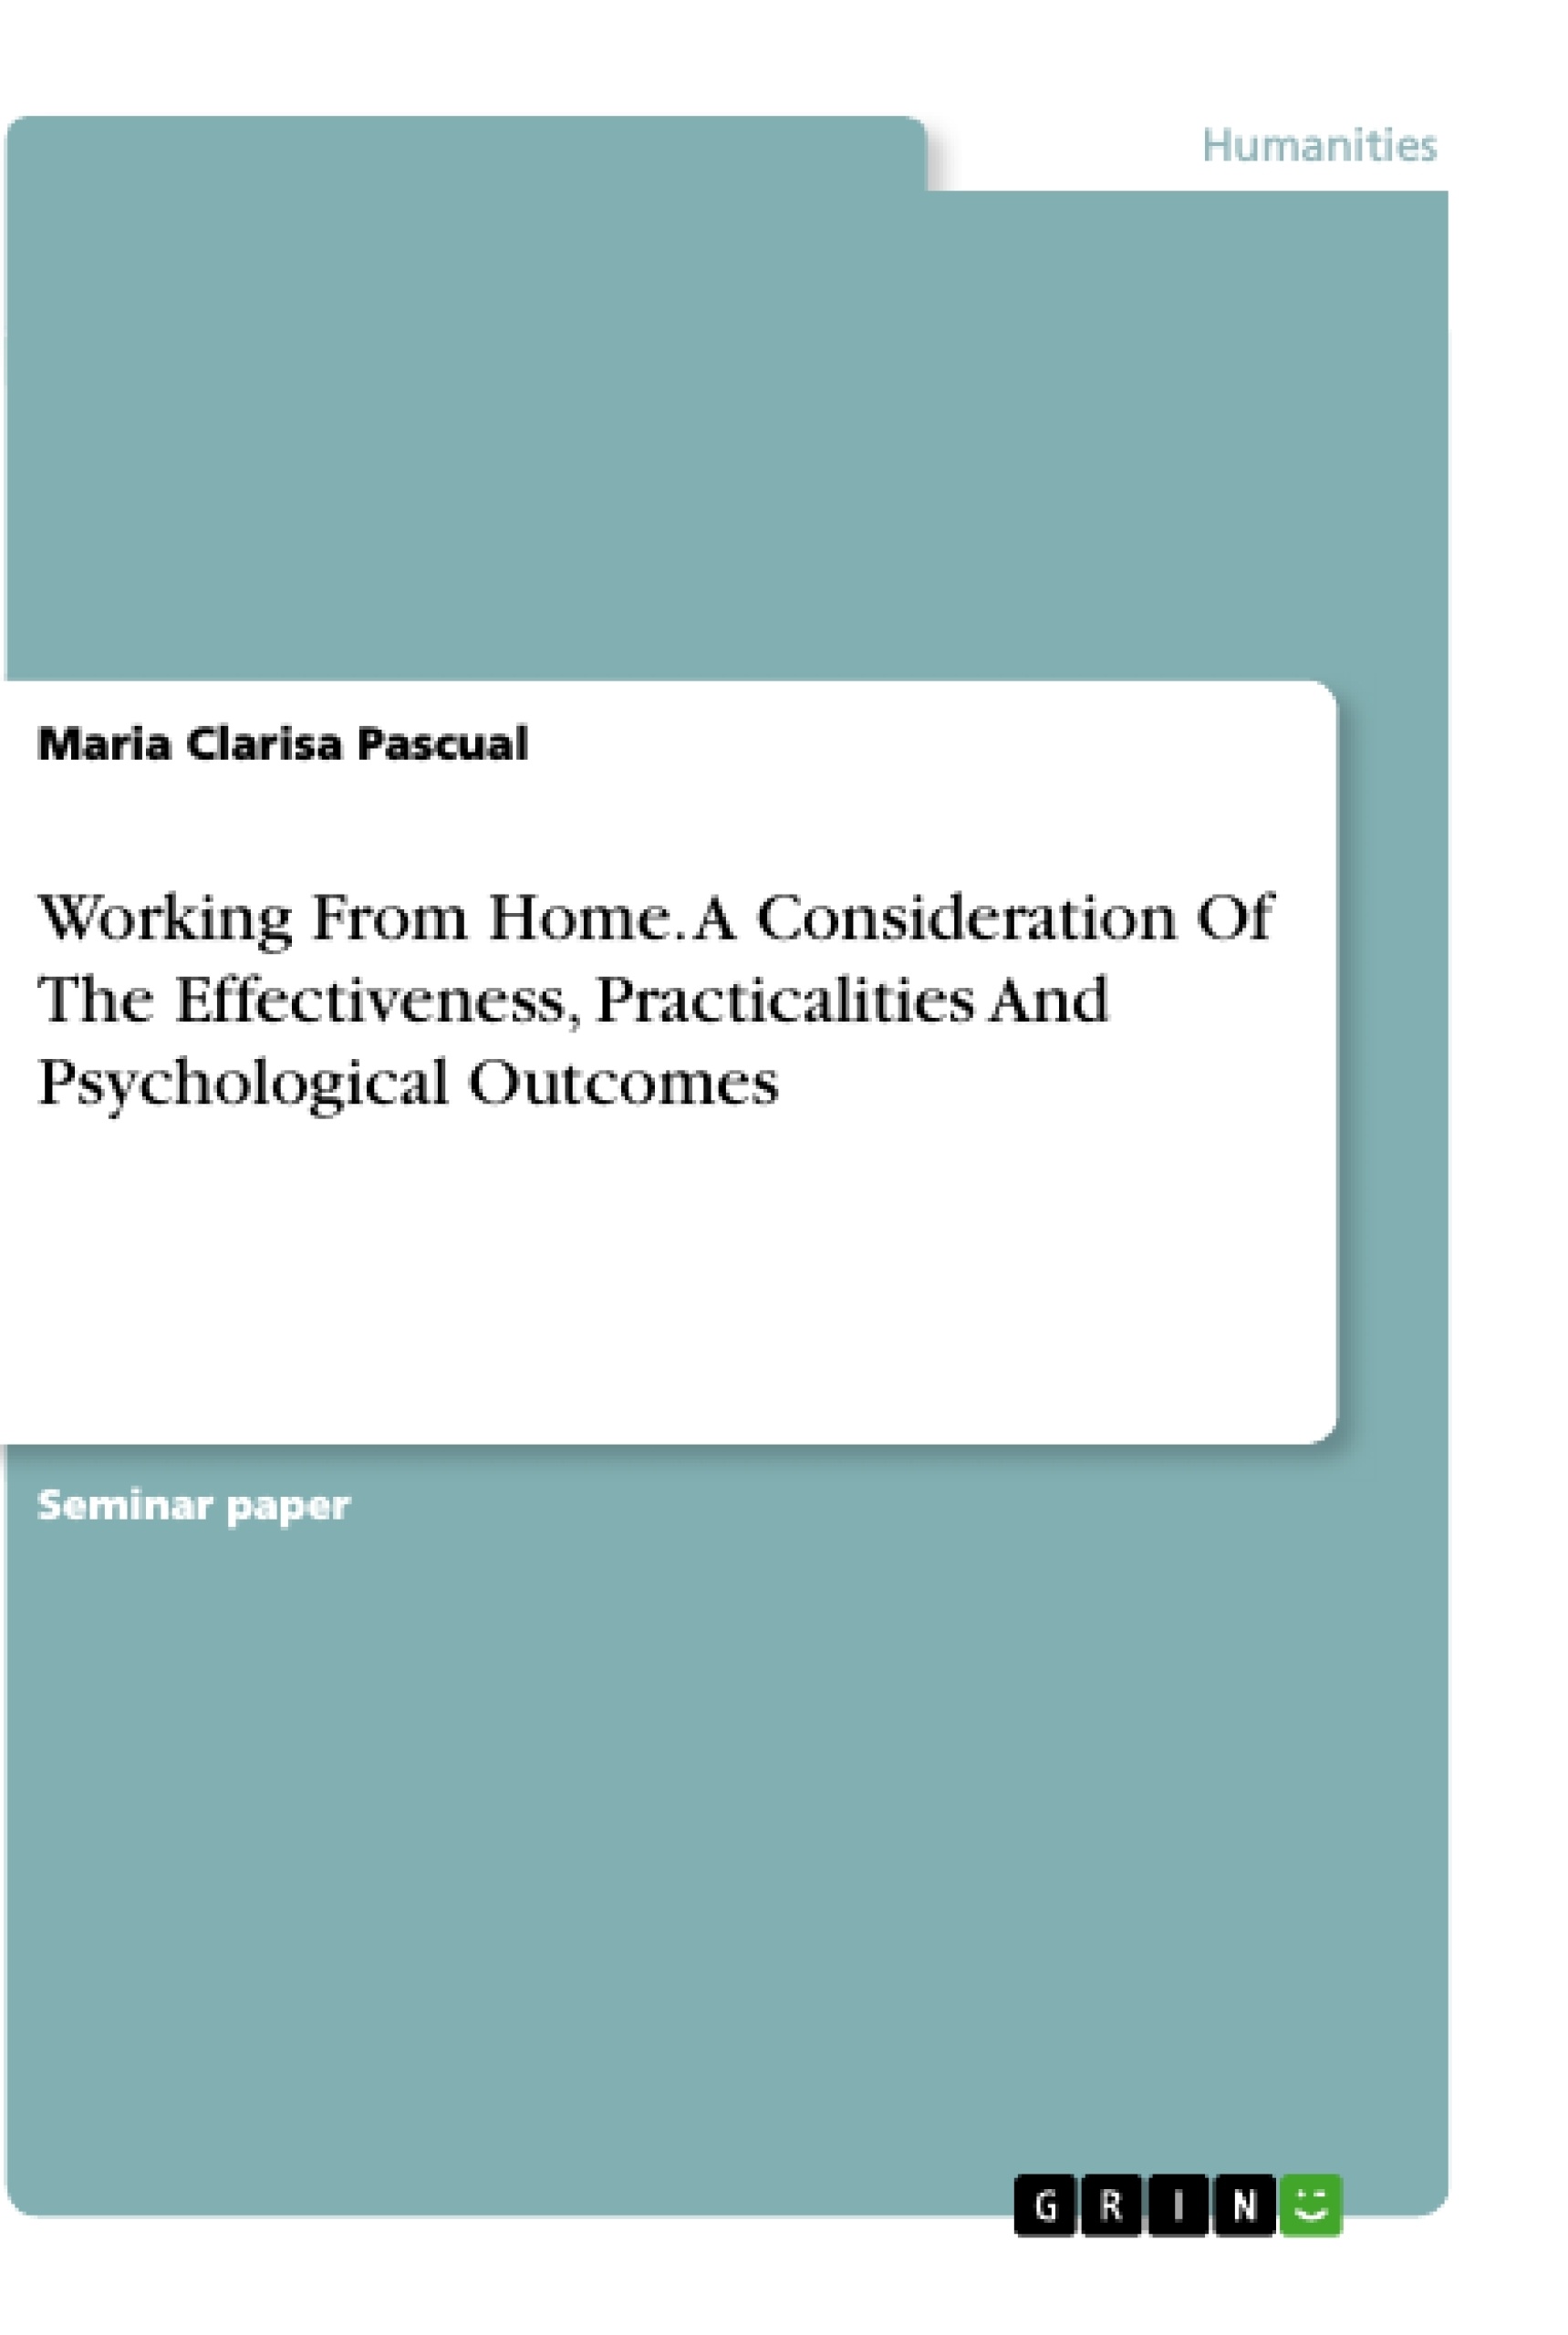 Título: Working From Home. A Consideration Of The Effectiveness, Practicalities And Psychological Outcomes